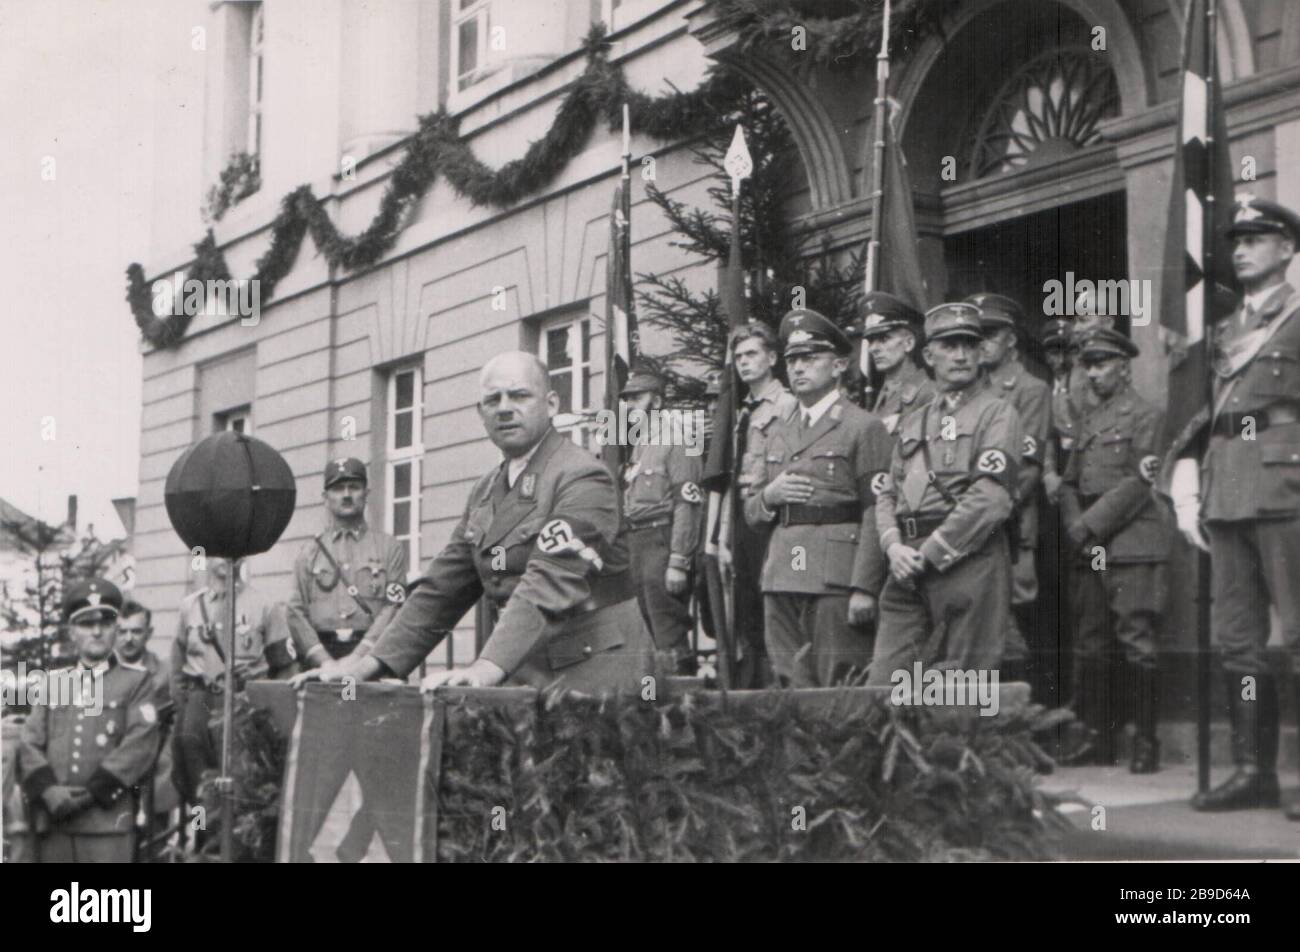 Fritz Sauckel, Gauleiter of Thuringia, during a speech in Zeulenroda Sauckel was sentenced to death by hanging for his crimes during the Nuremberg trials. [automated translation] Stock Photo